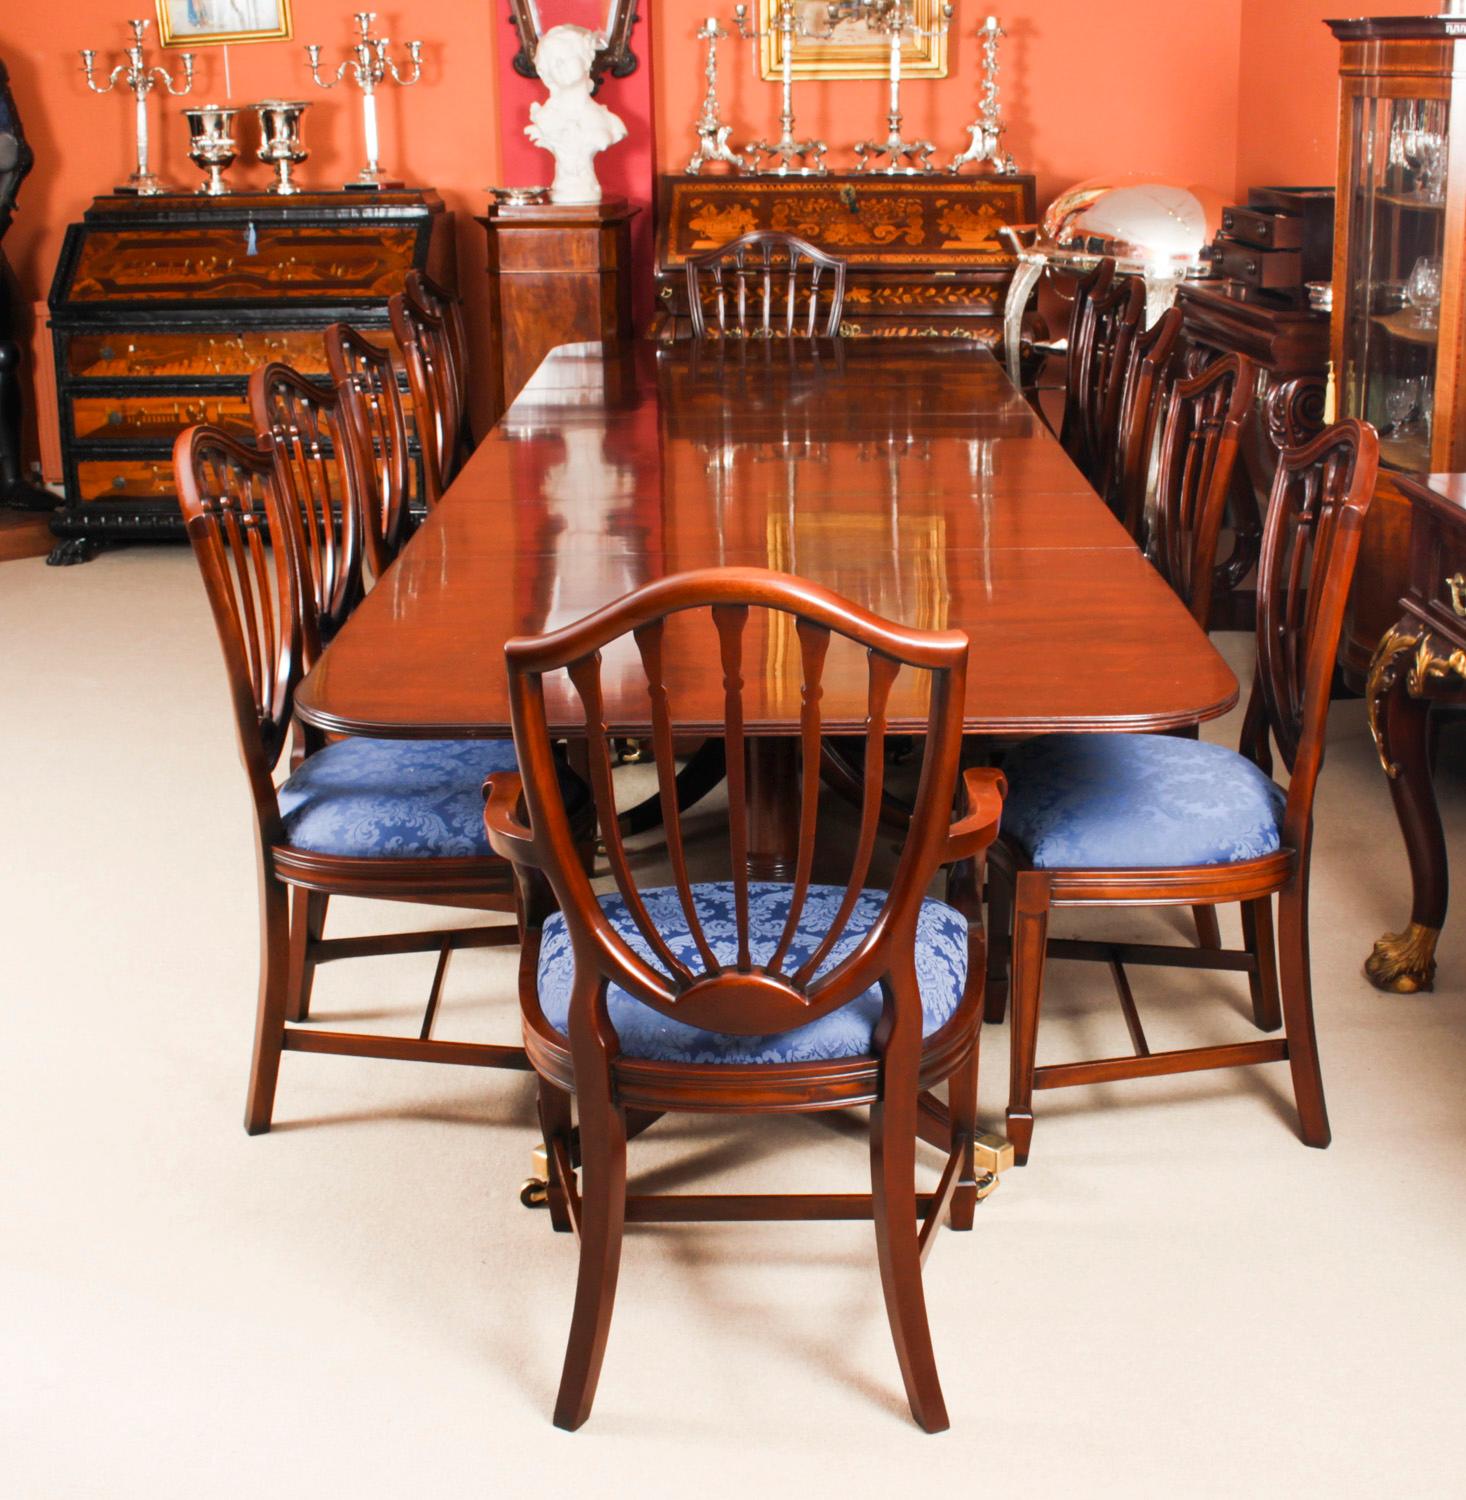 This is a fabulous Vintage Regency Revival dining table by the master cabinet maker William Tillman, Circa 1980 in date.

It is made of stunning solid flame mahogany and is raised on three 